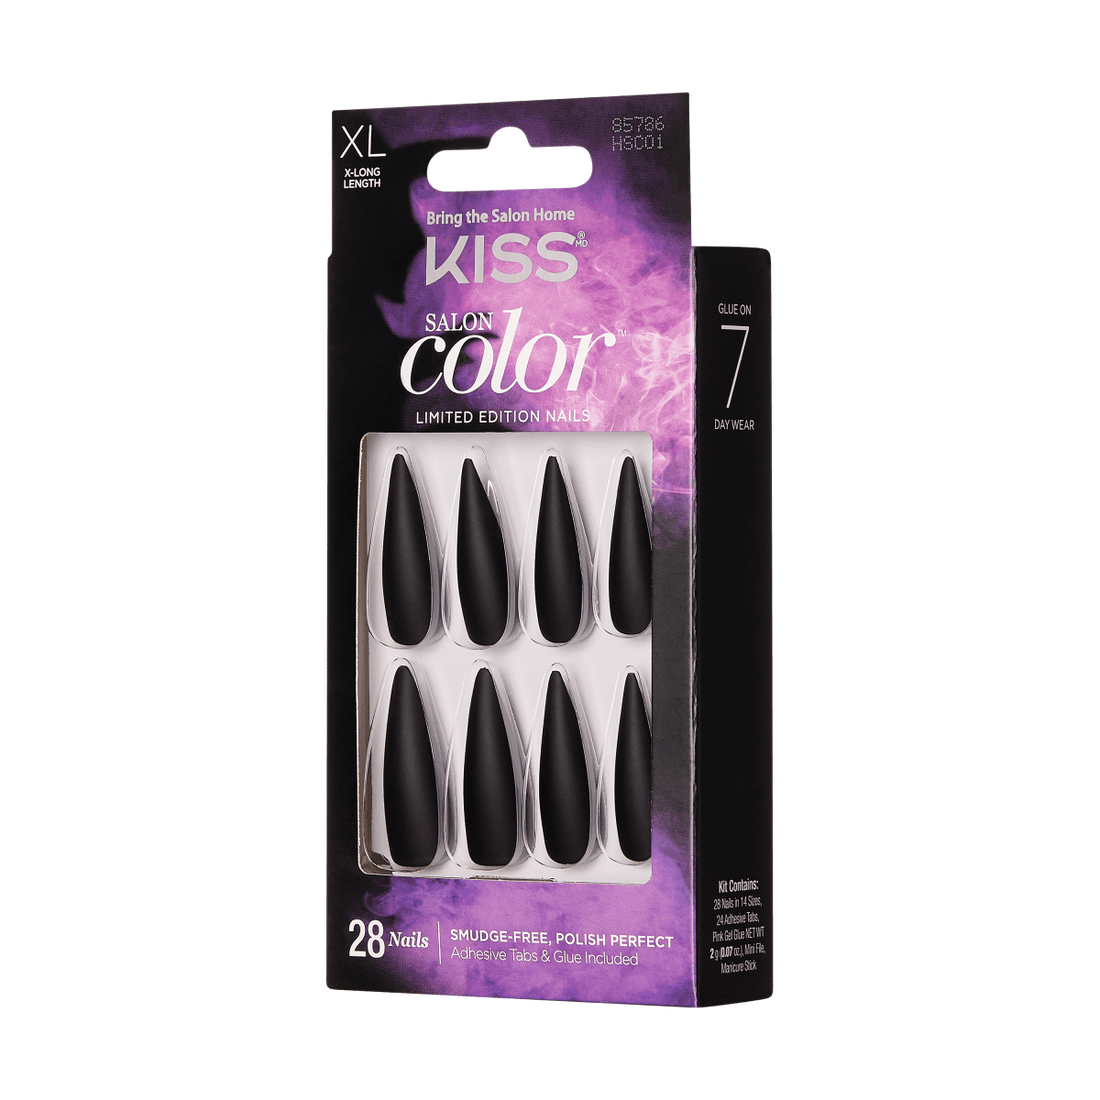 KISS Halloween Salon Color Nails - Refund Sisters